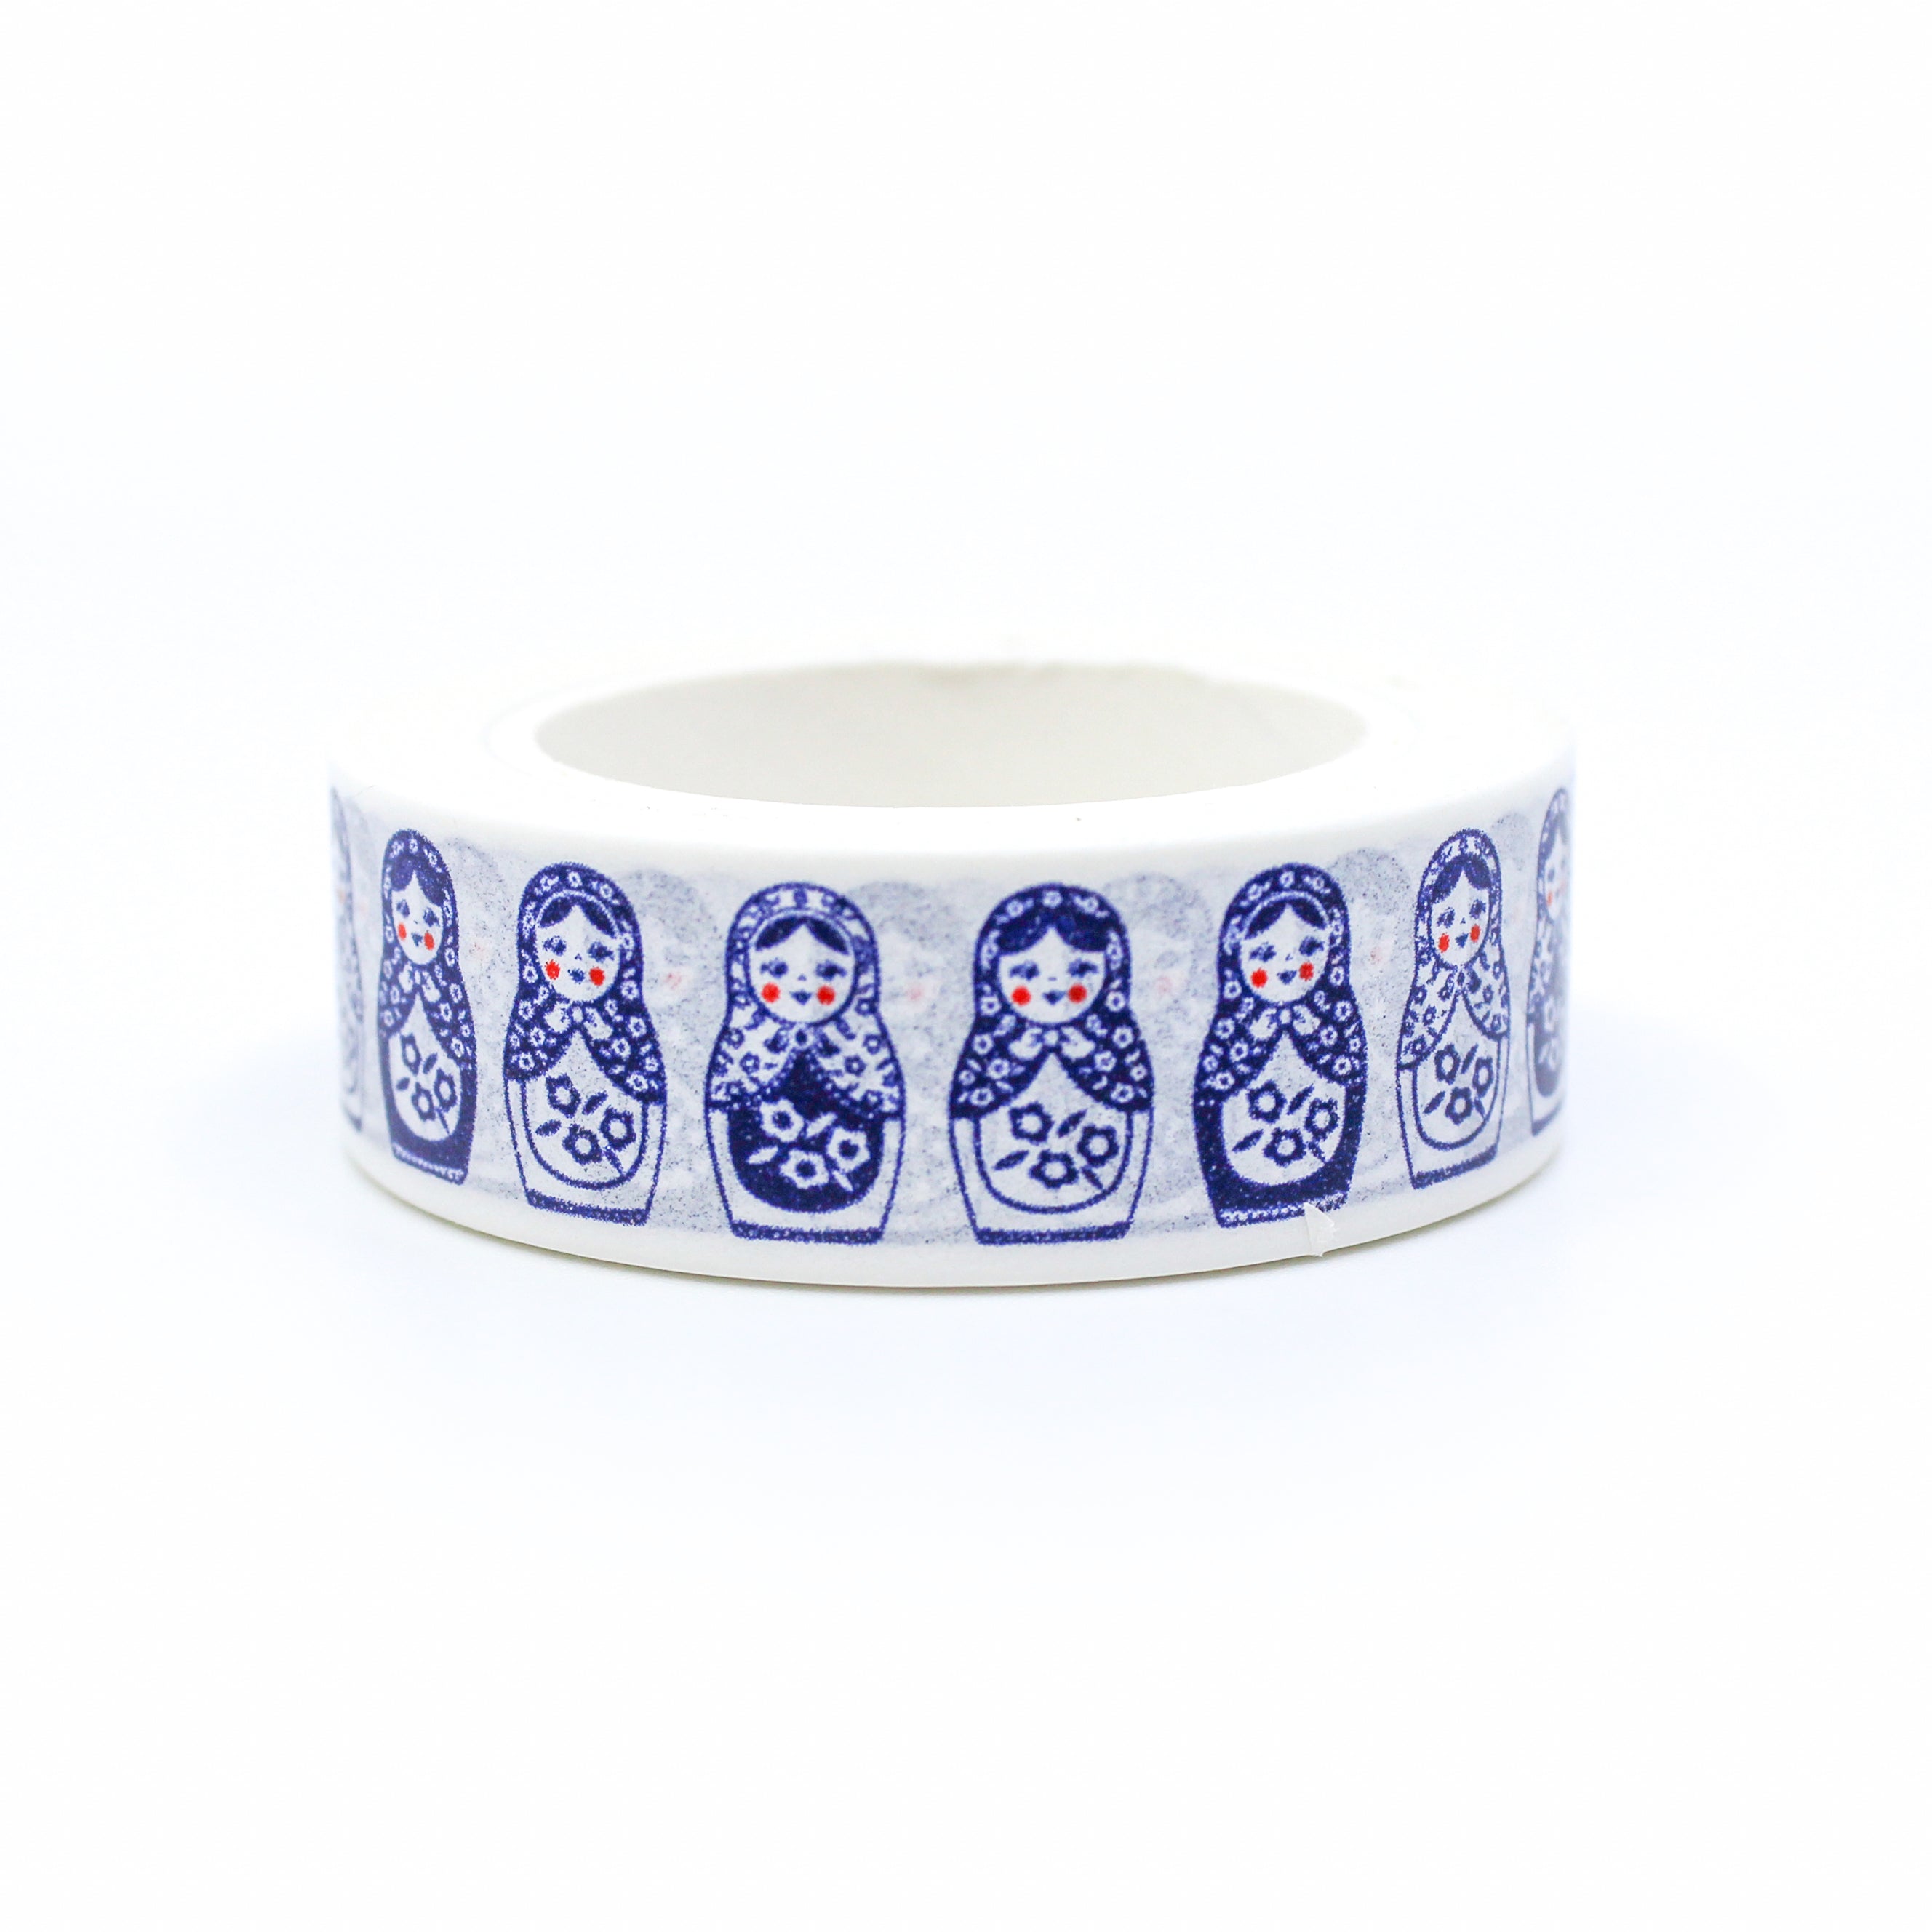 This is a view of blue nesting dolls pattern washi tape from BBB Supplies Craft Shop